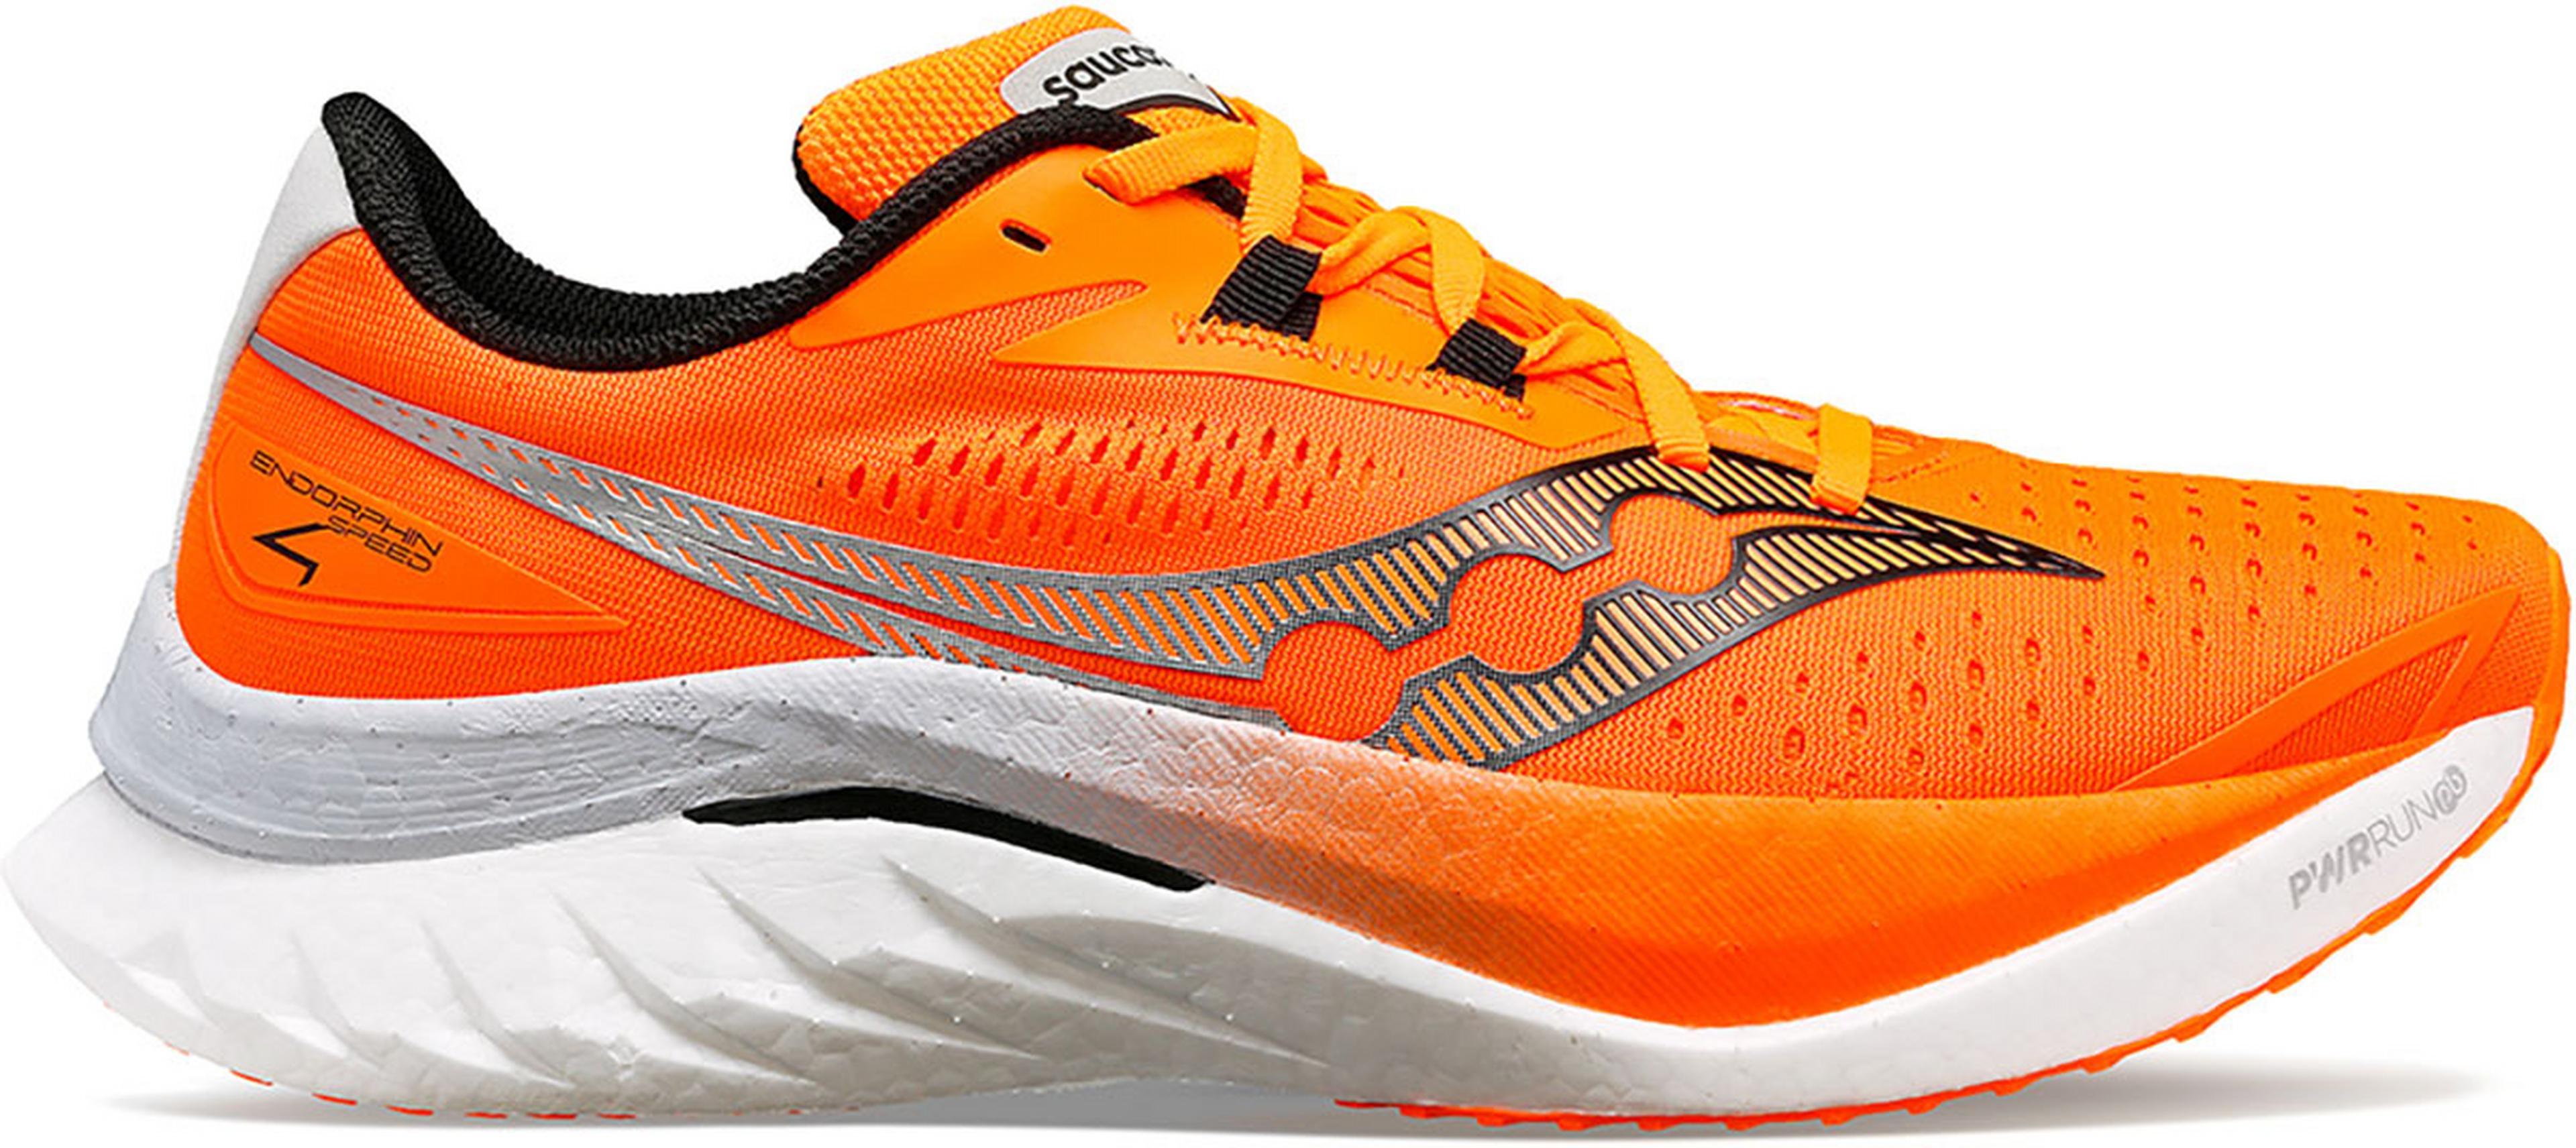 Saucony Endorphin Speed 4 Running Shoes